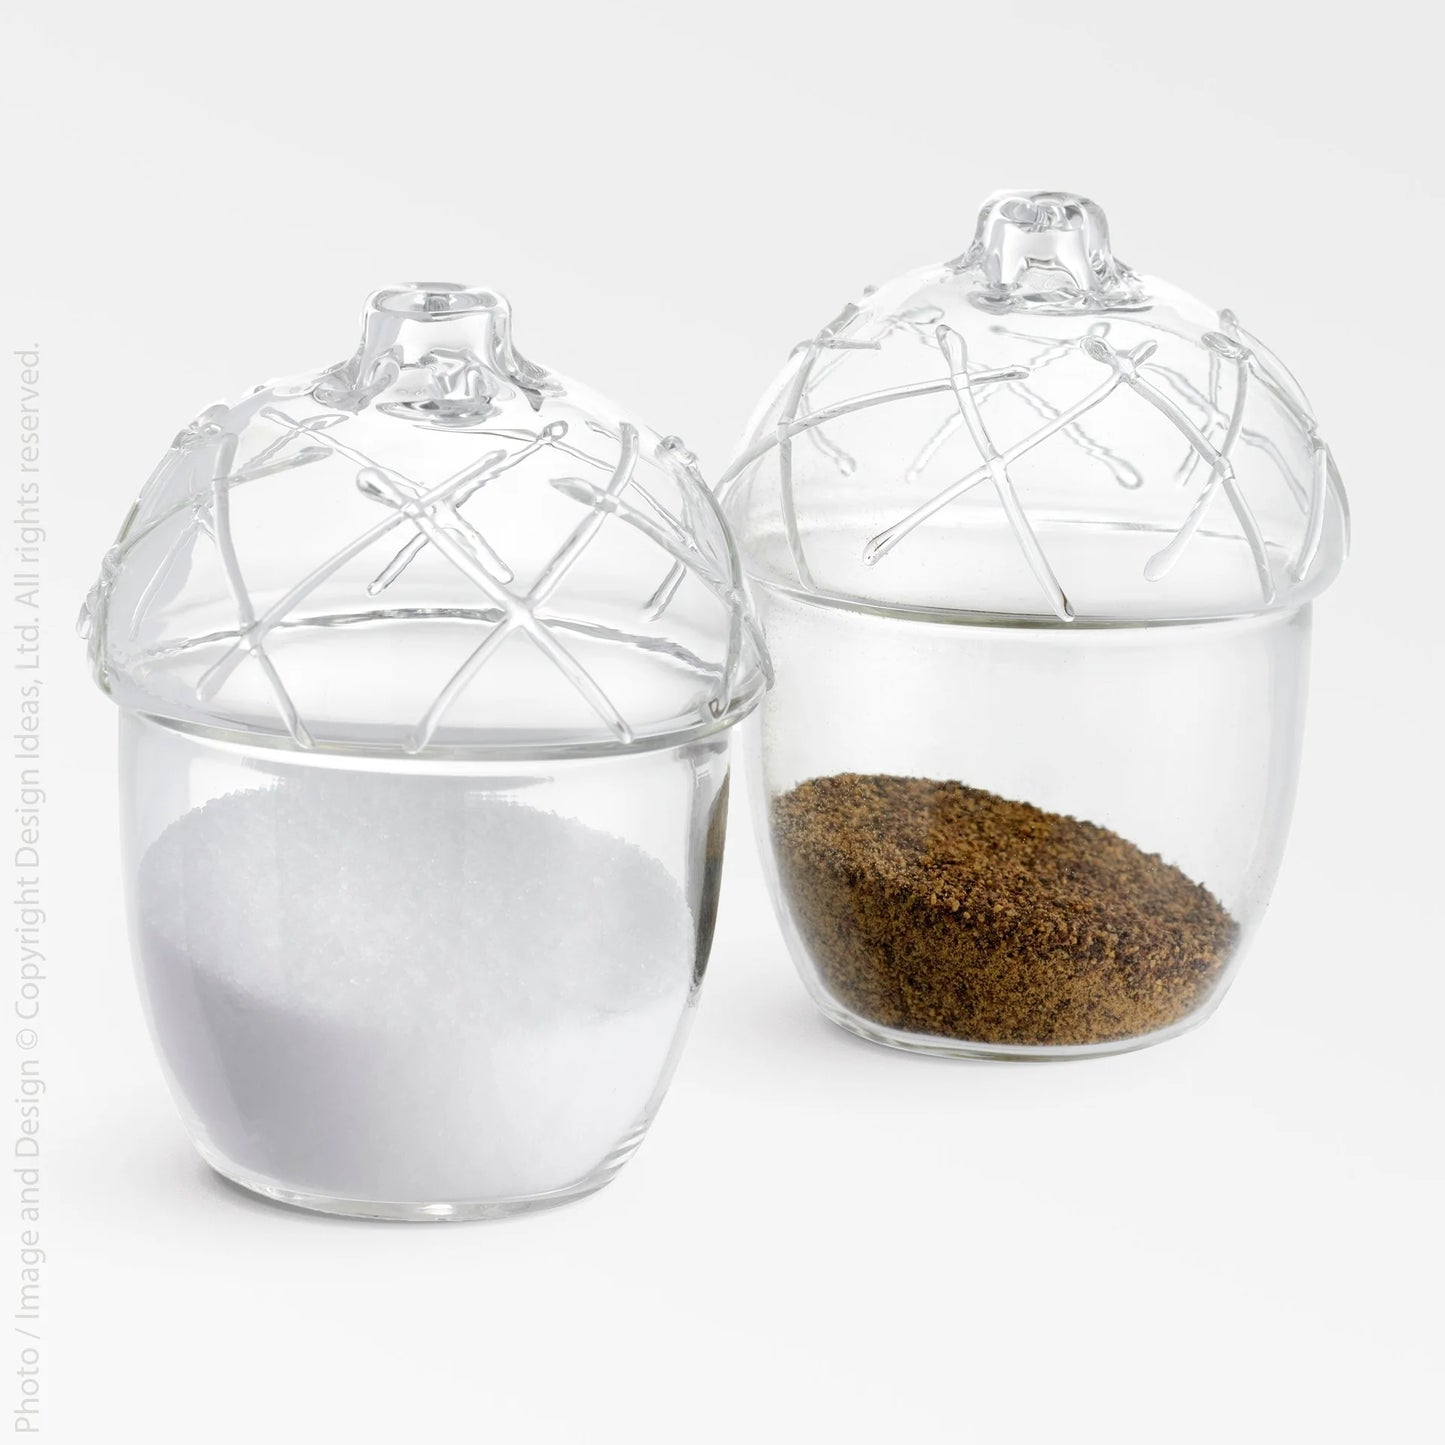 Design Ideas Texxture Acorn Nutty clear glass Salt and Pepper Shakers 